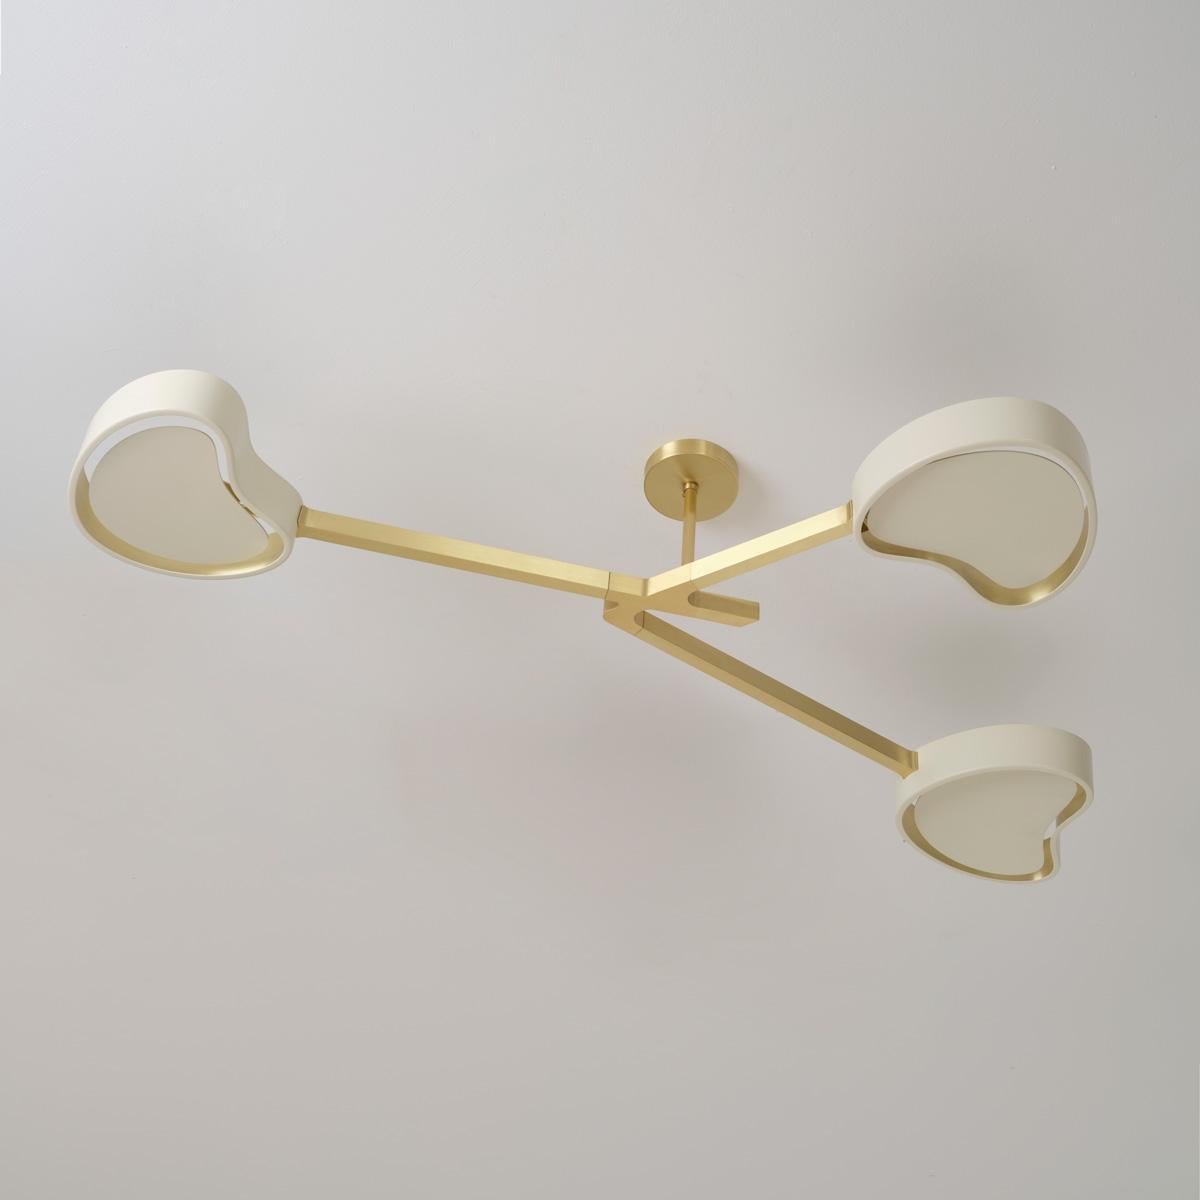 Contemporary Cuore N.3 Ceiling Light by Gaspare Asaro. Polished Brass Finish For Sale